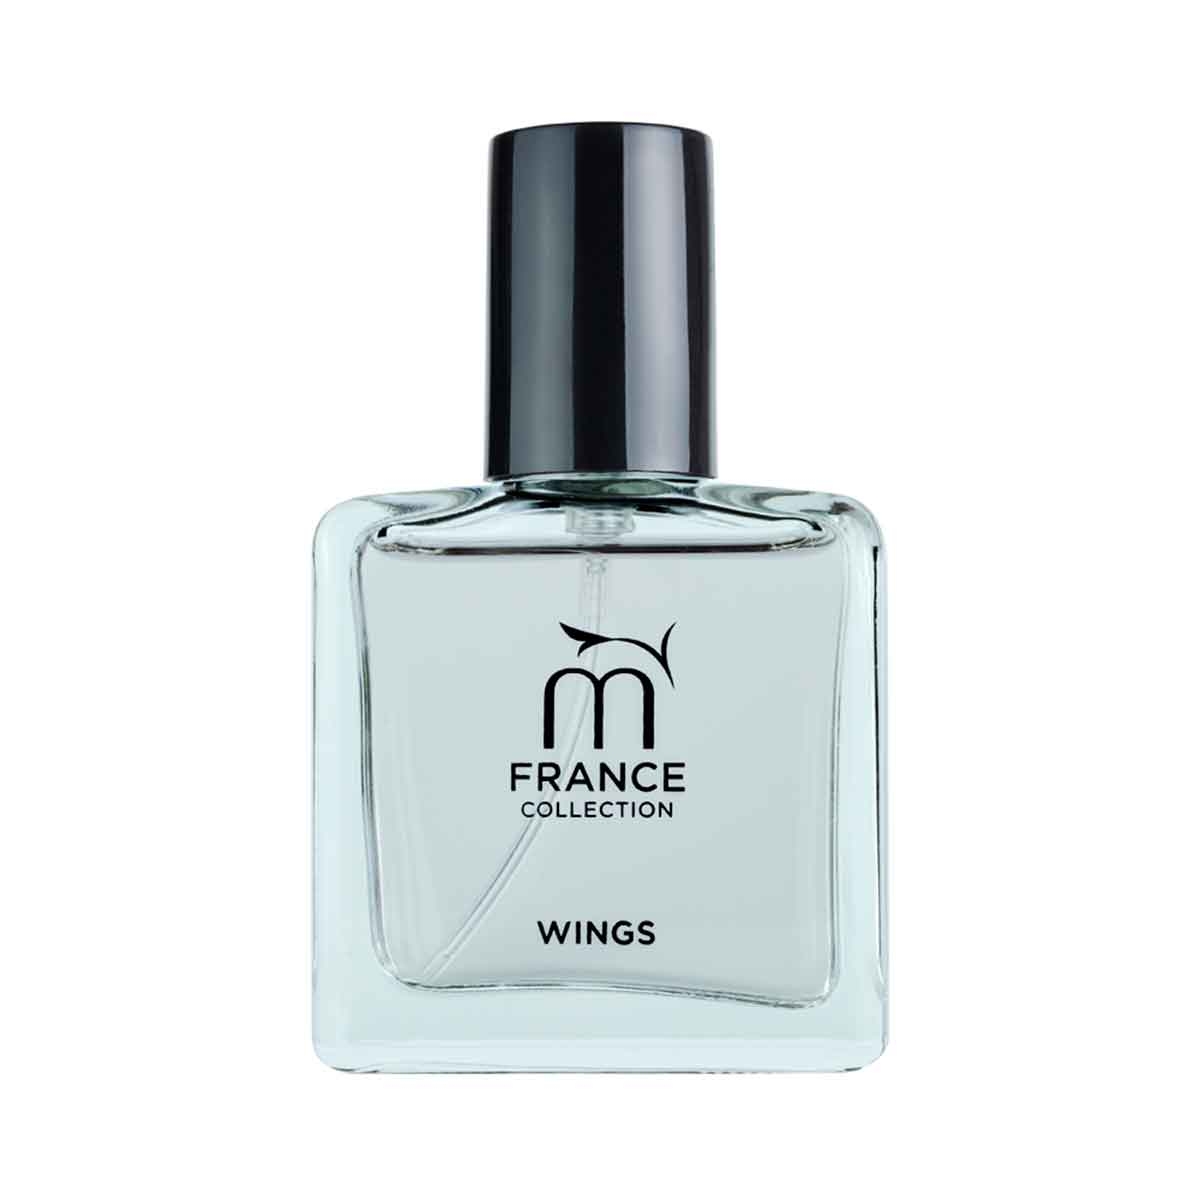 Deo Colônia Masculina Muriel France Collection Wings com 25ml 25ml